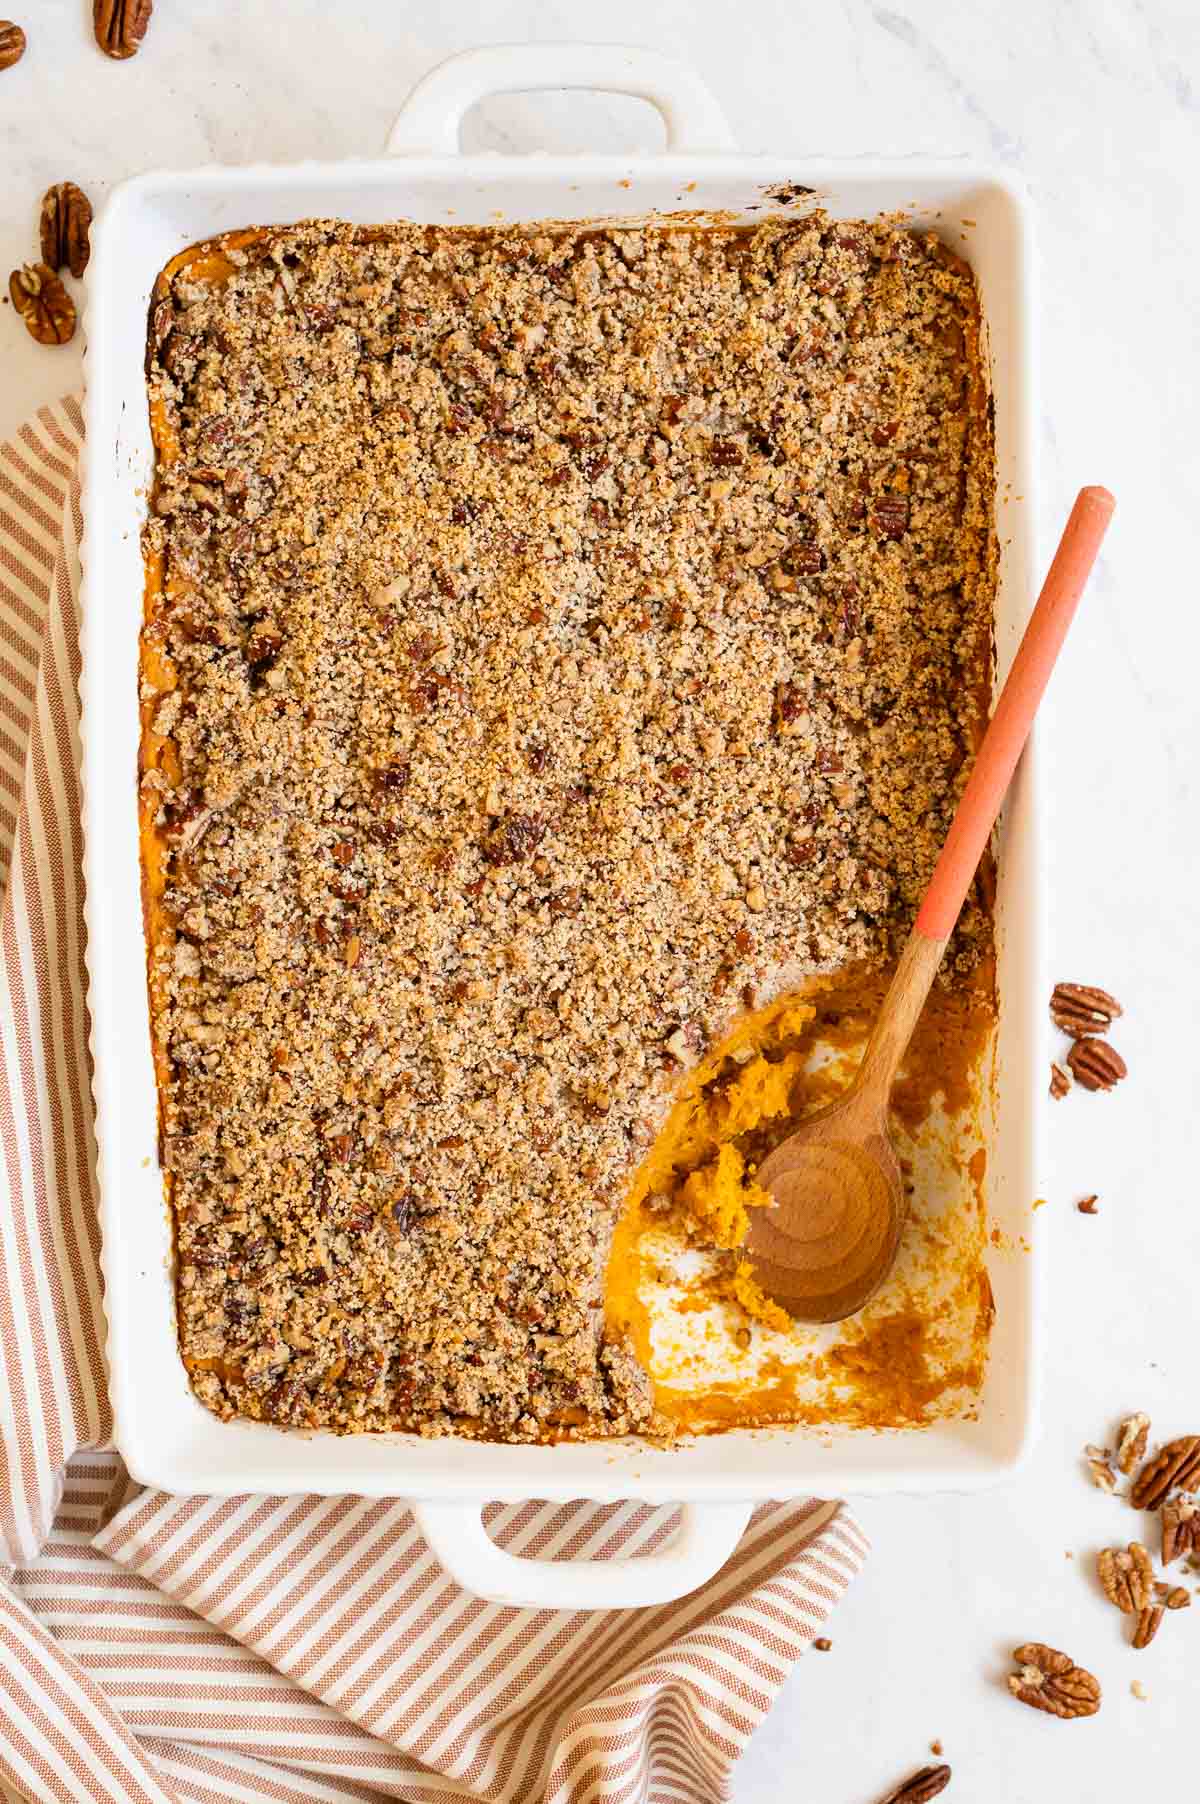 Healthy sweet potato casserole with a wooden spoon in baking dish.